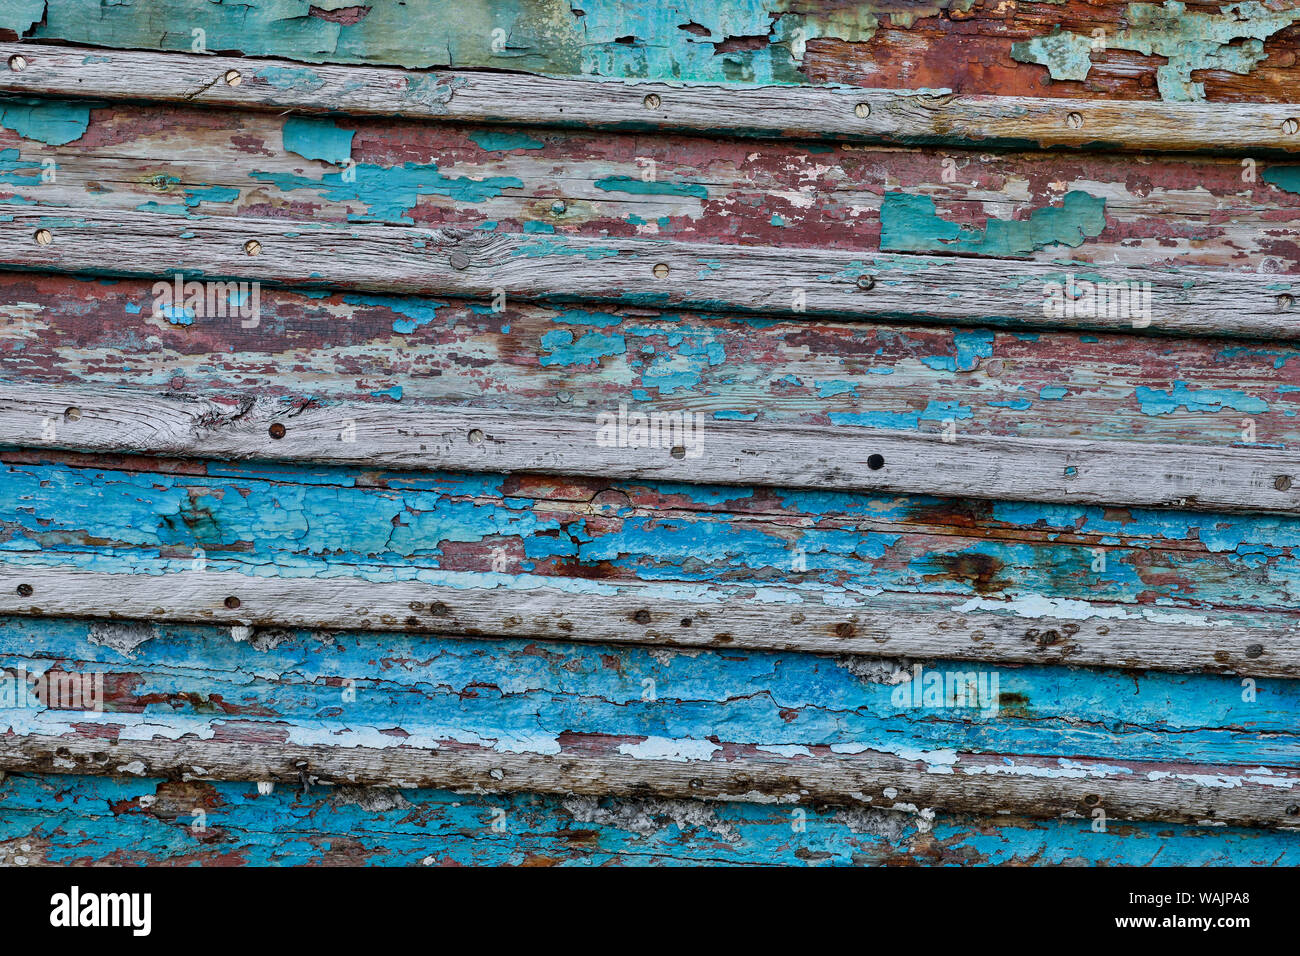 Old wooden fishing boat out of water, detail of paint. Crescent City, California. Stock Photo